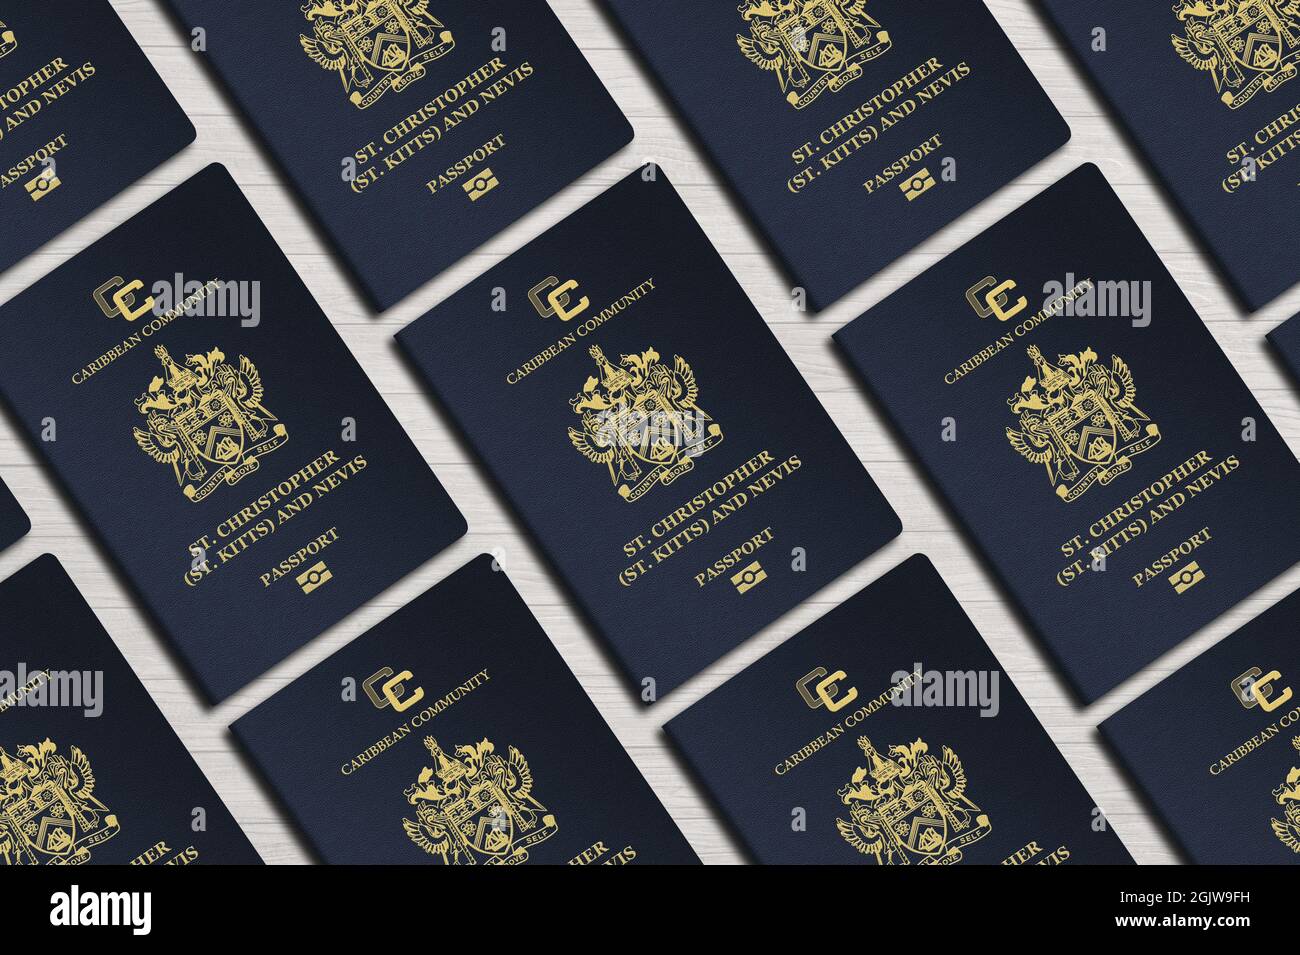 Passports of the Caribbean state of Saint Kitts and Nevis, top view, on a wooden table Stock Photo